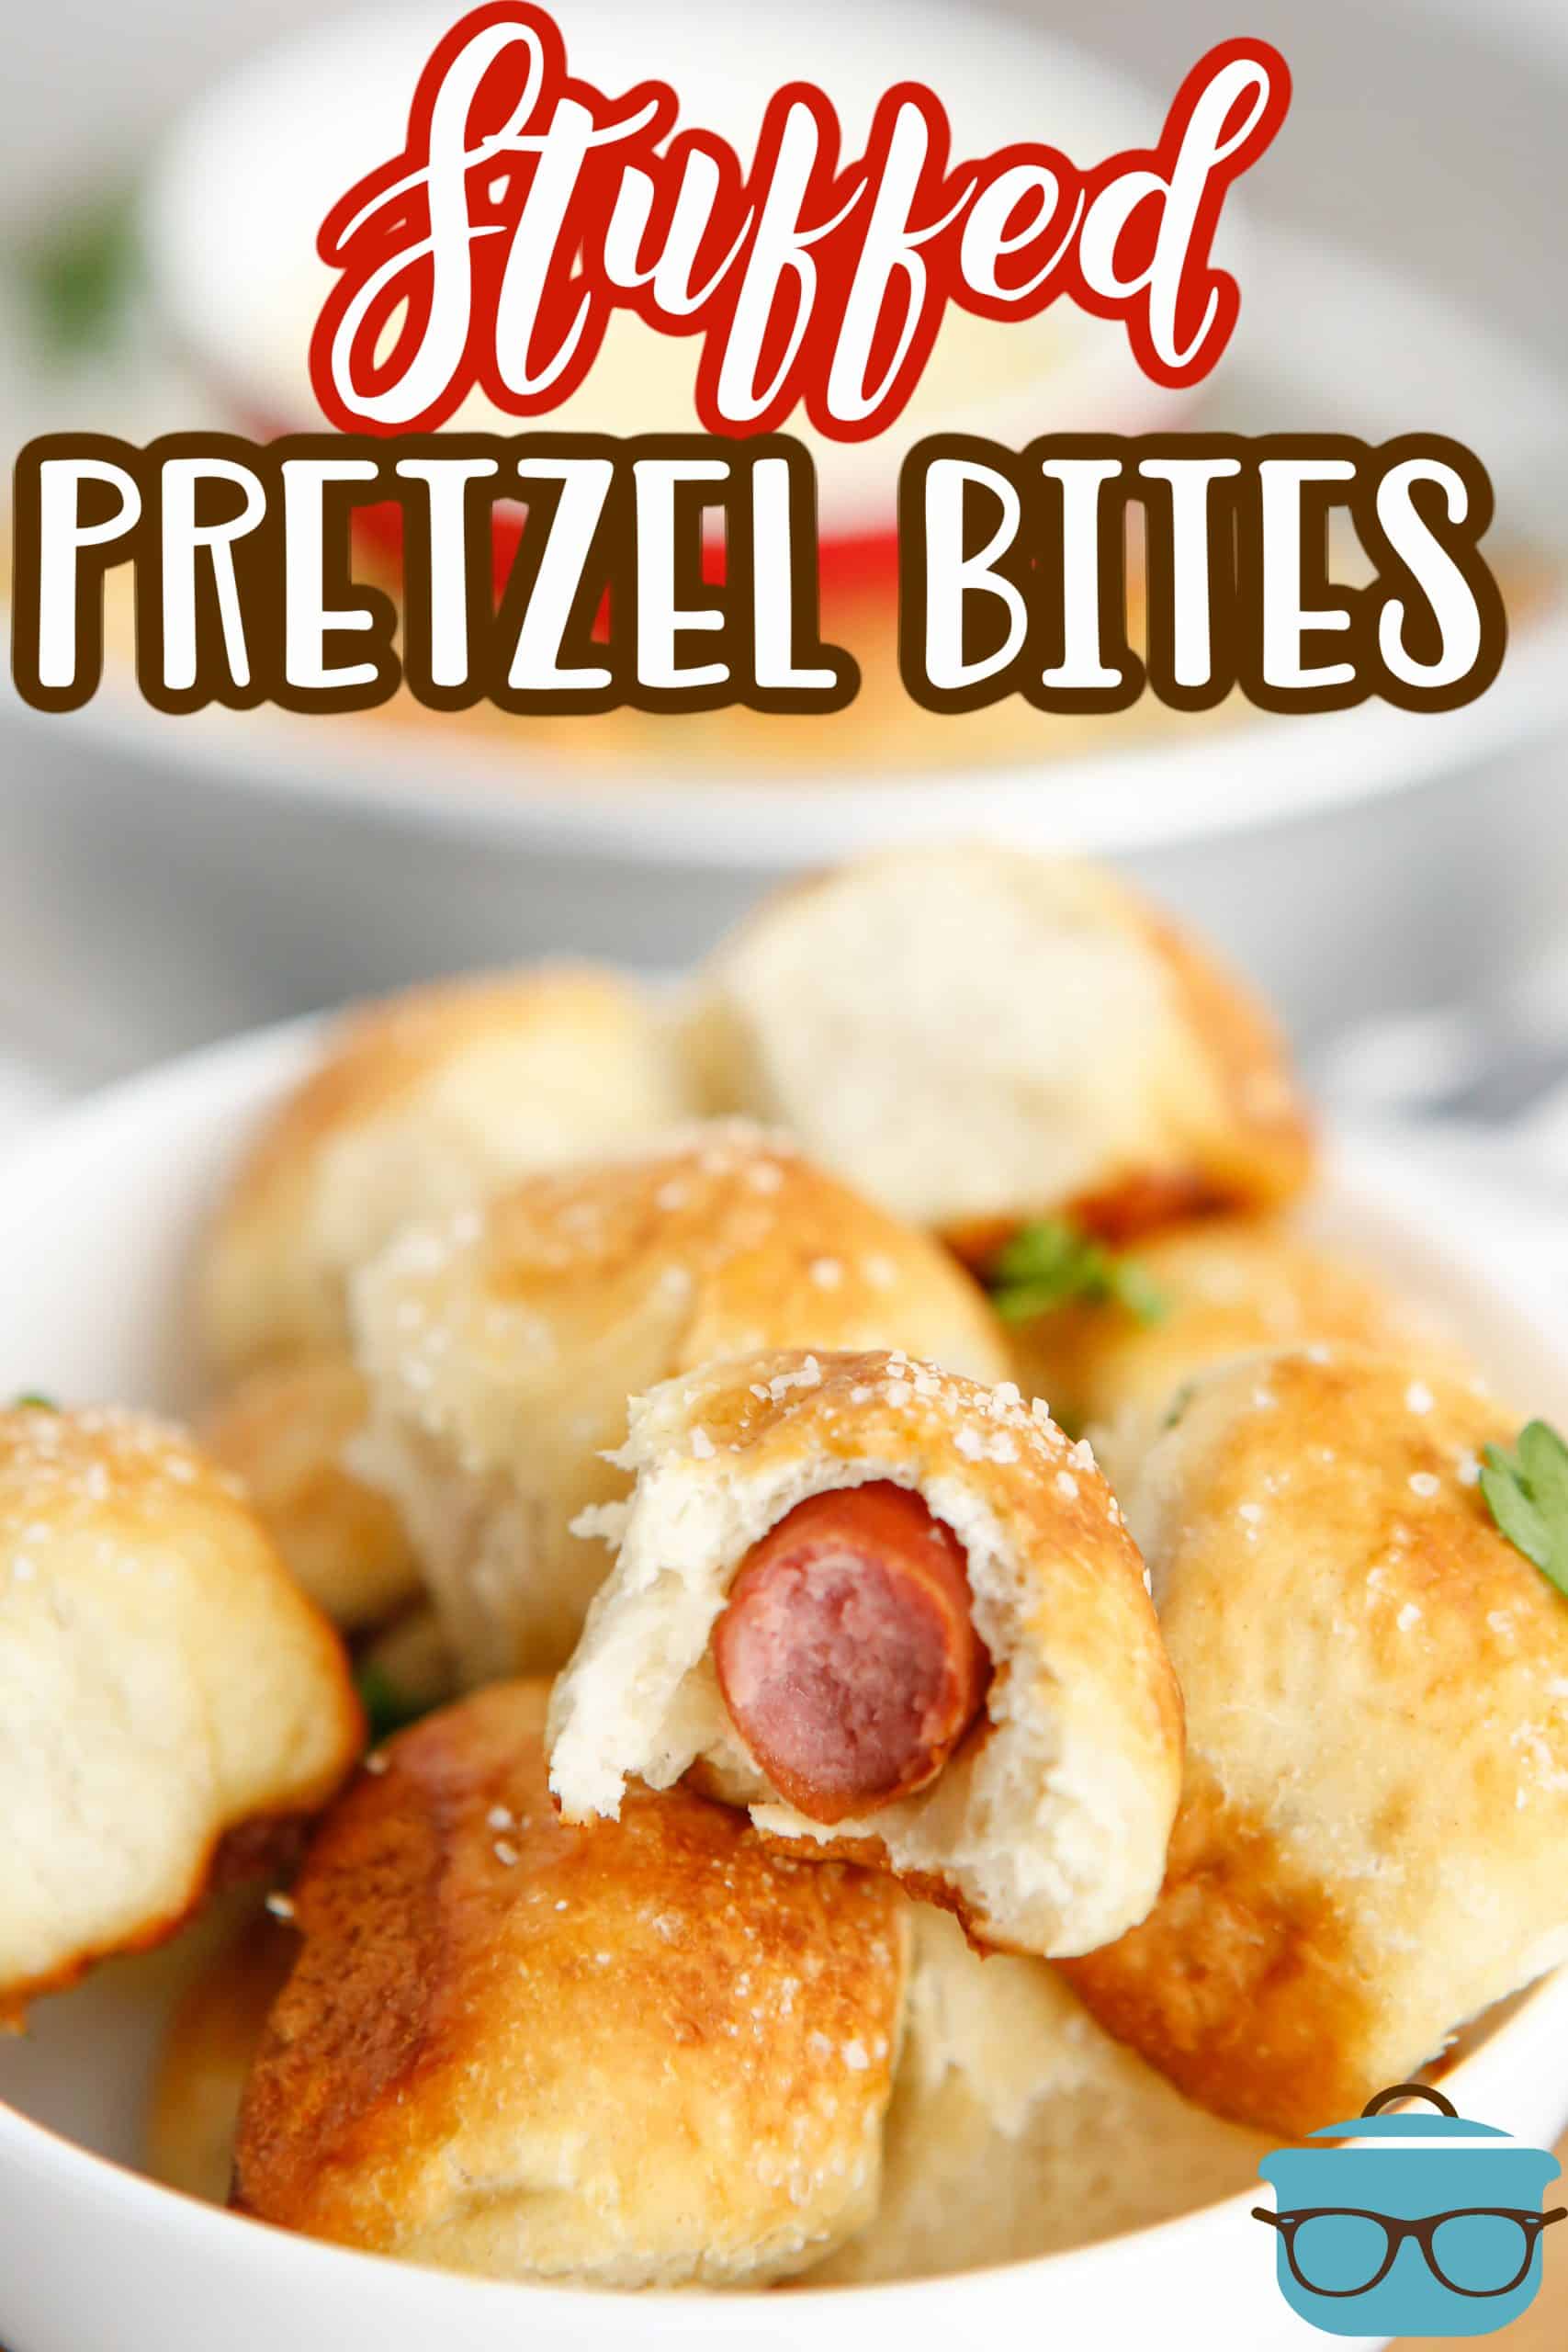 Stacked Stuffed Pretzel Bites in bowl with one with bite taken out.